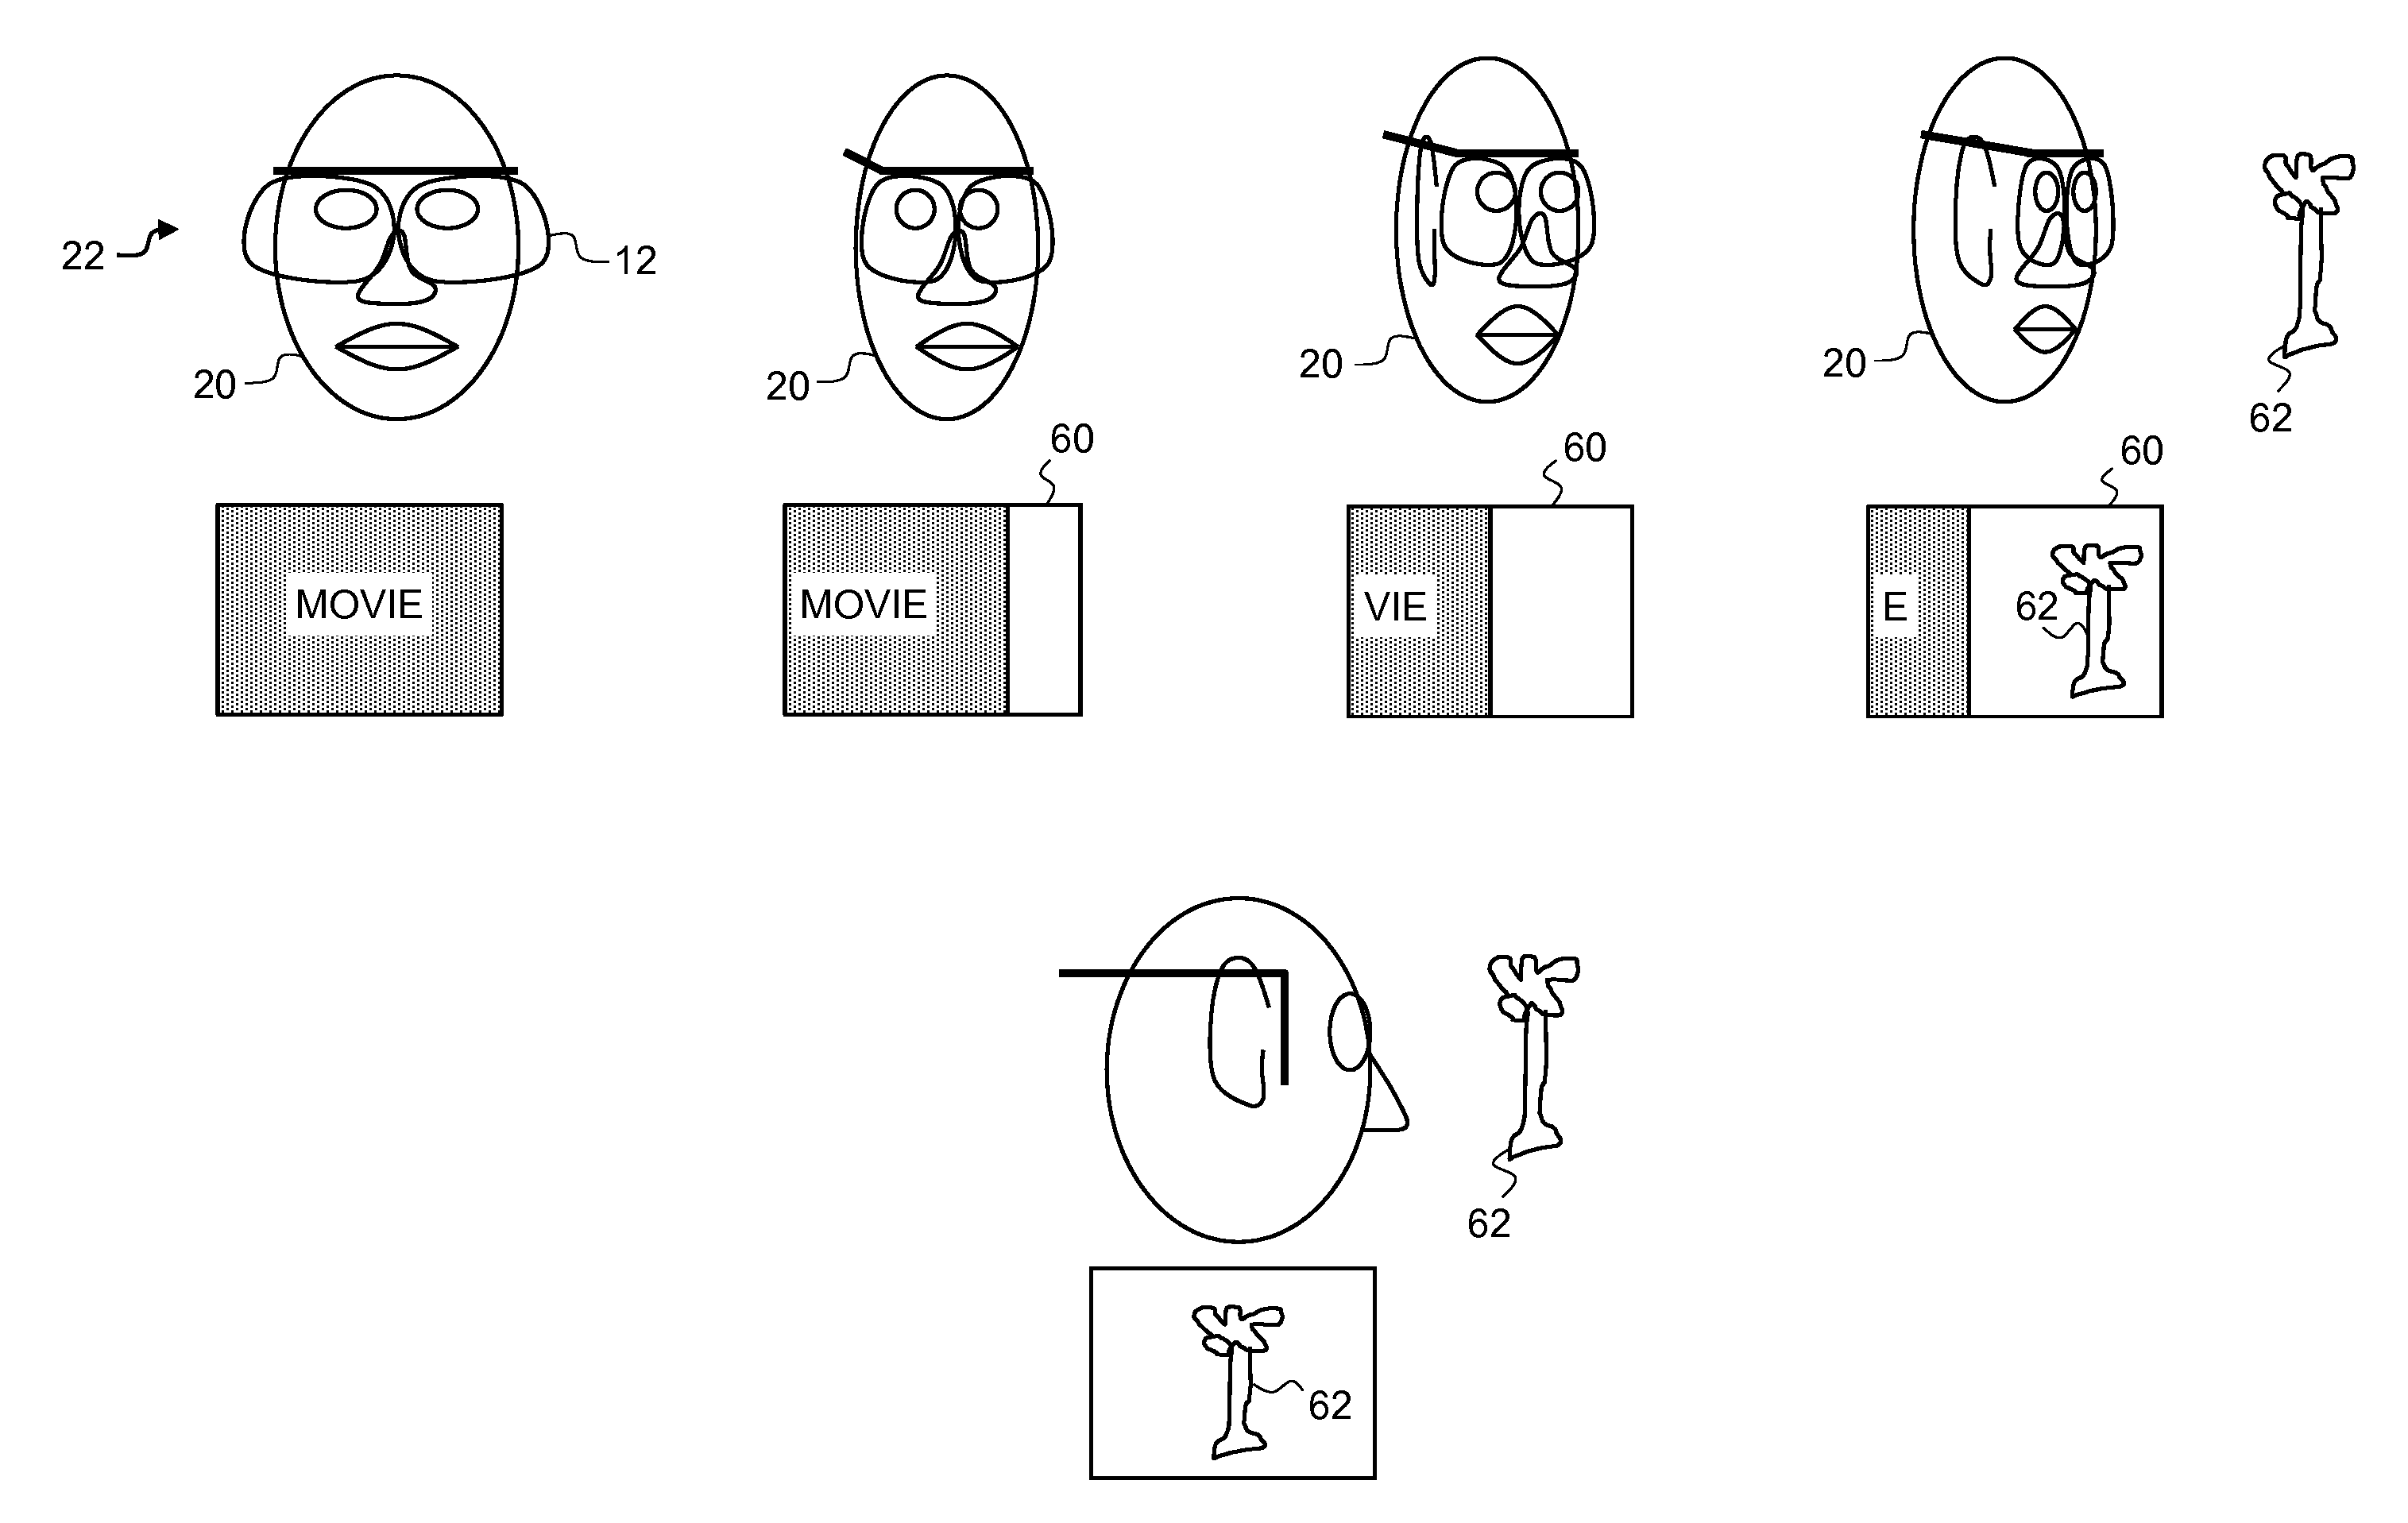 Head-mounted display with eye state detection